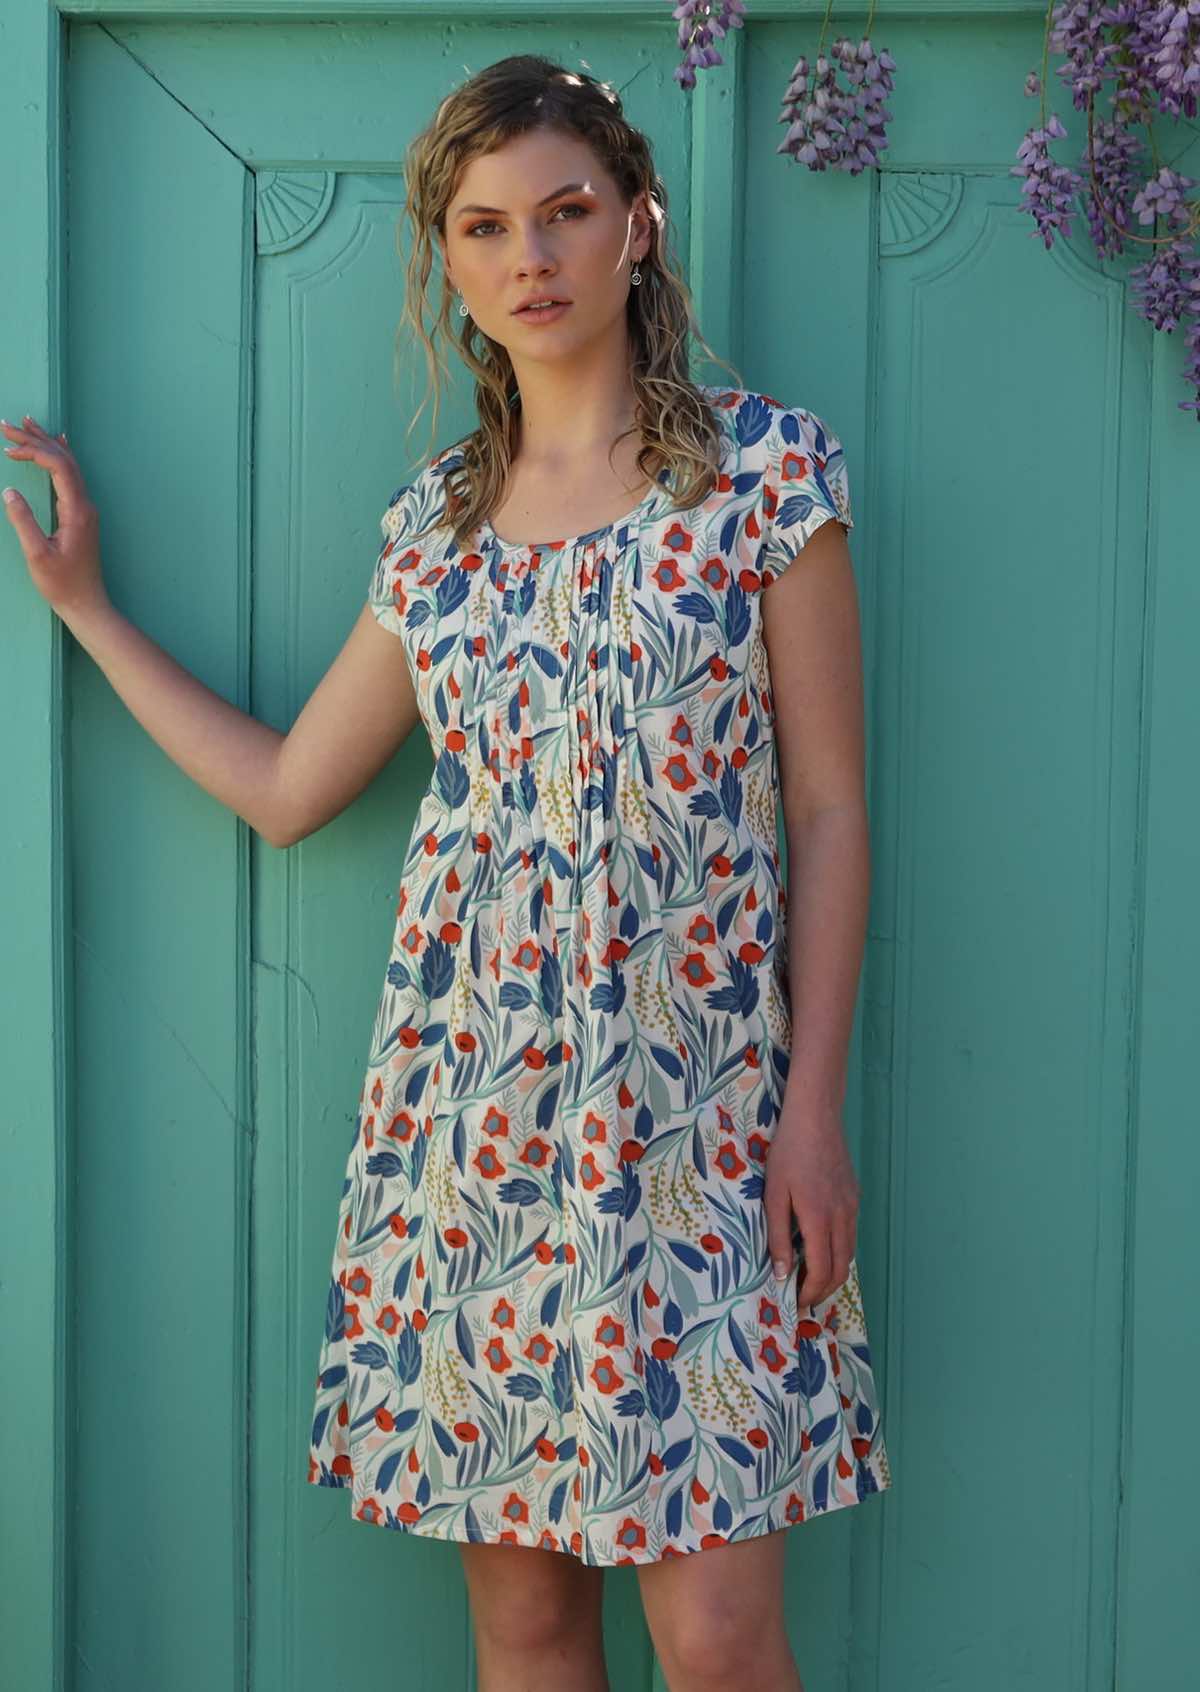 Model wears lightweight cotton dress with round neckline and cap sleeves